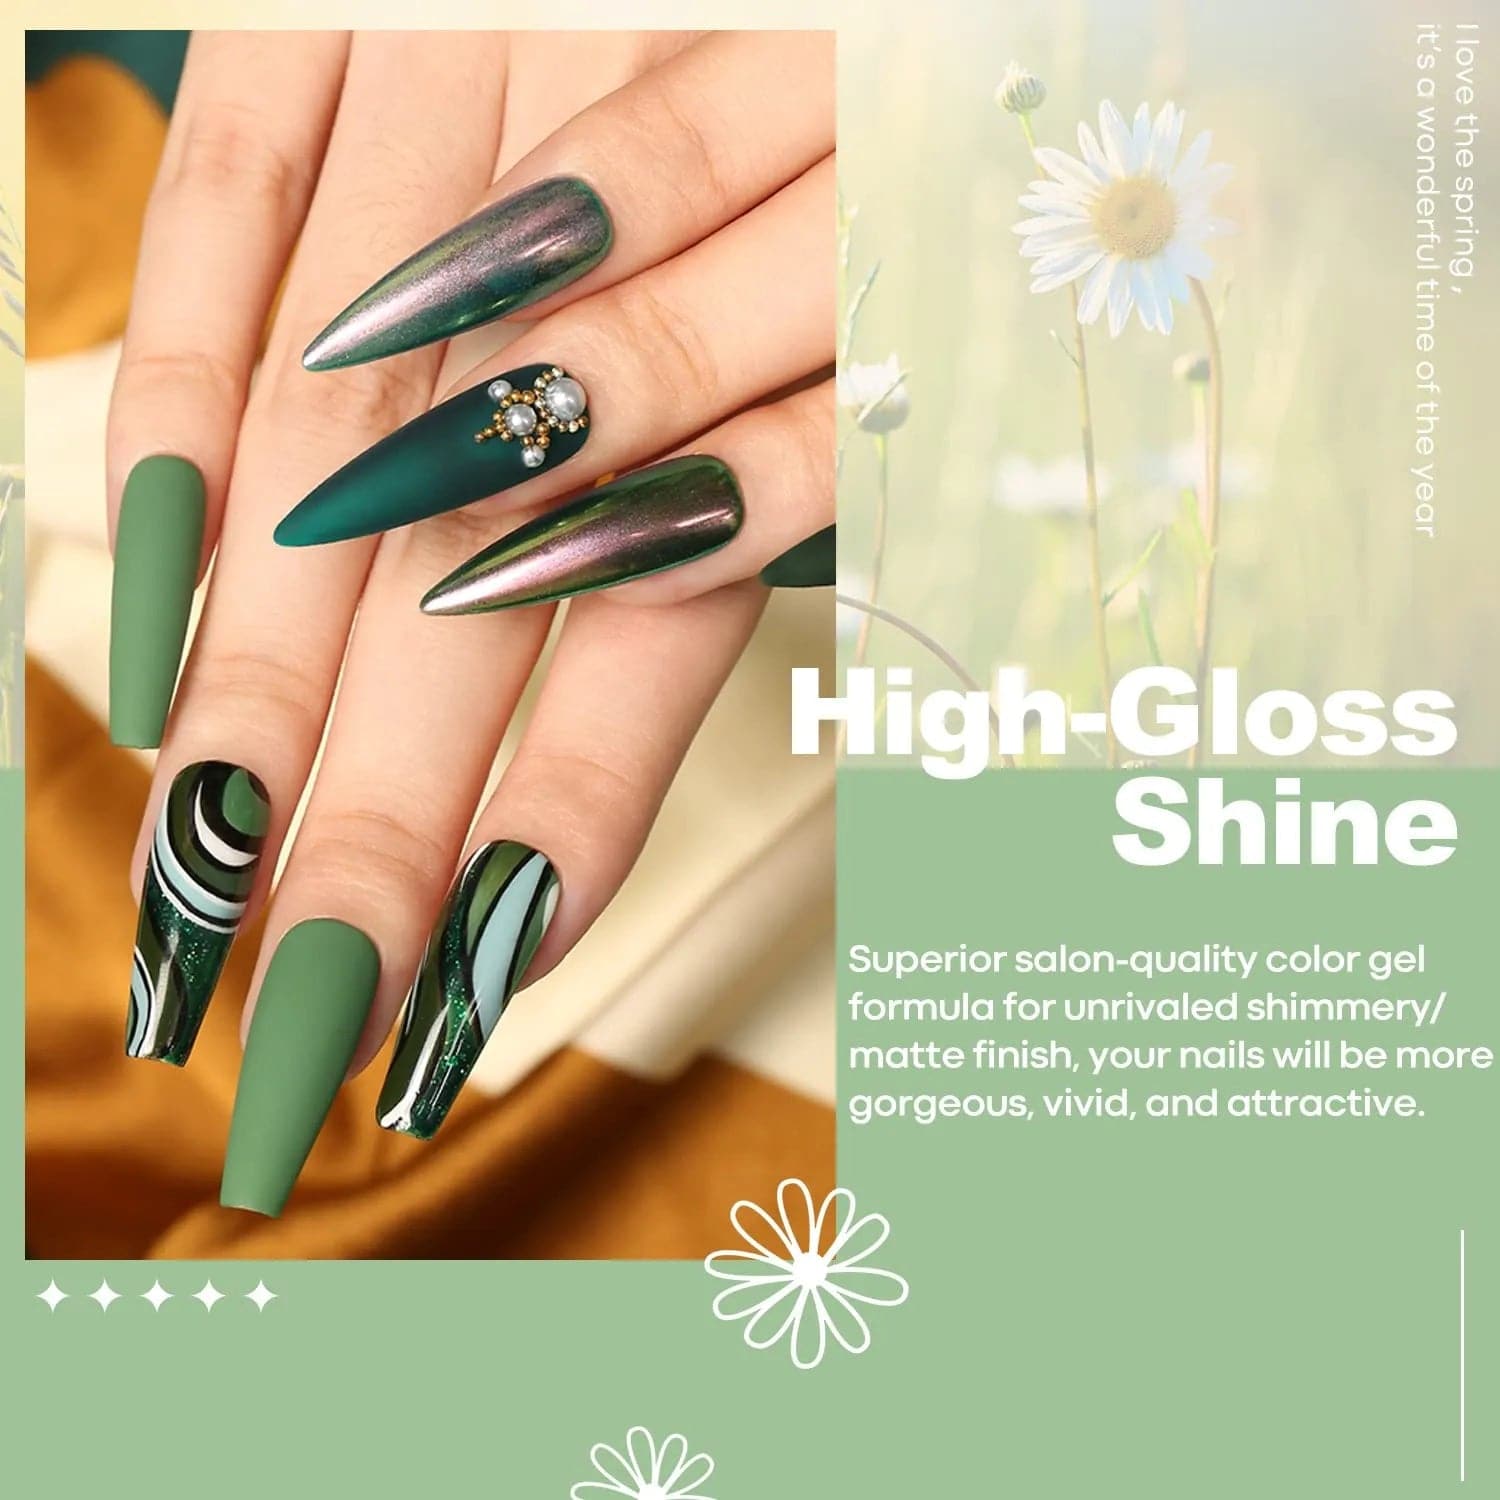 10 Hottest Nail Polish Shades To Wear This Summer - The Summer Study